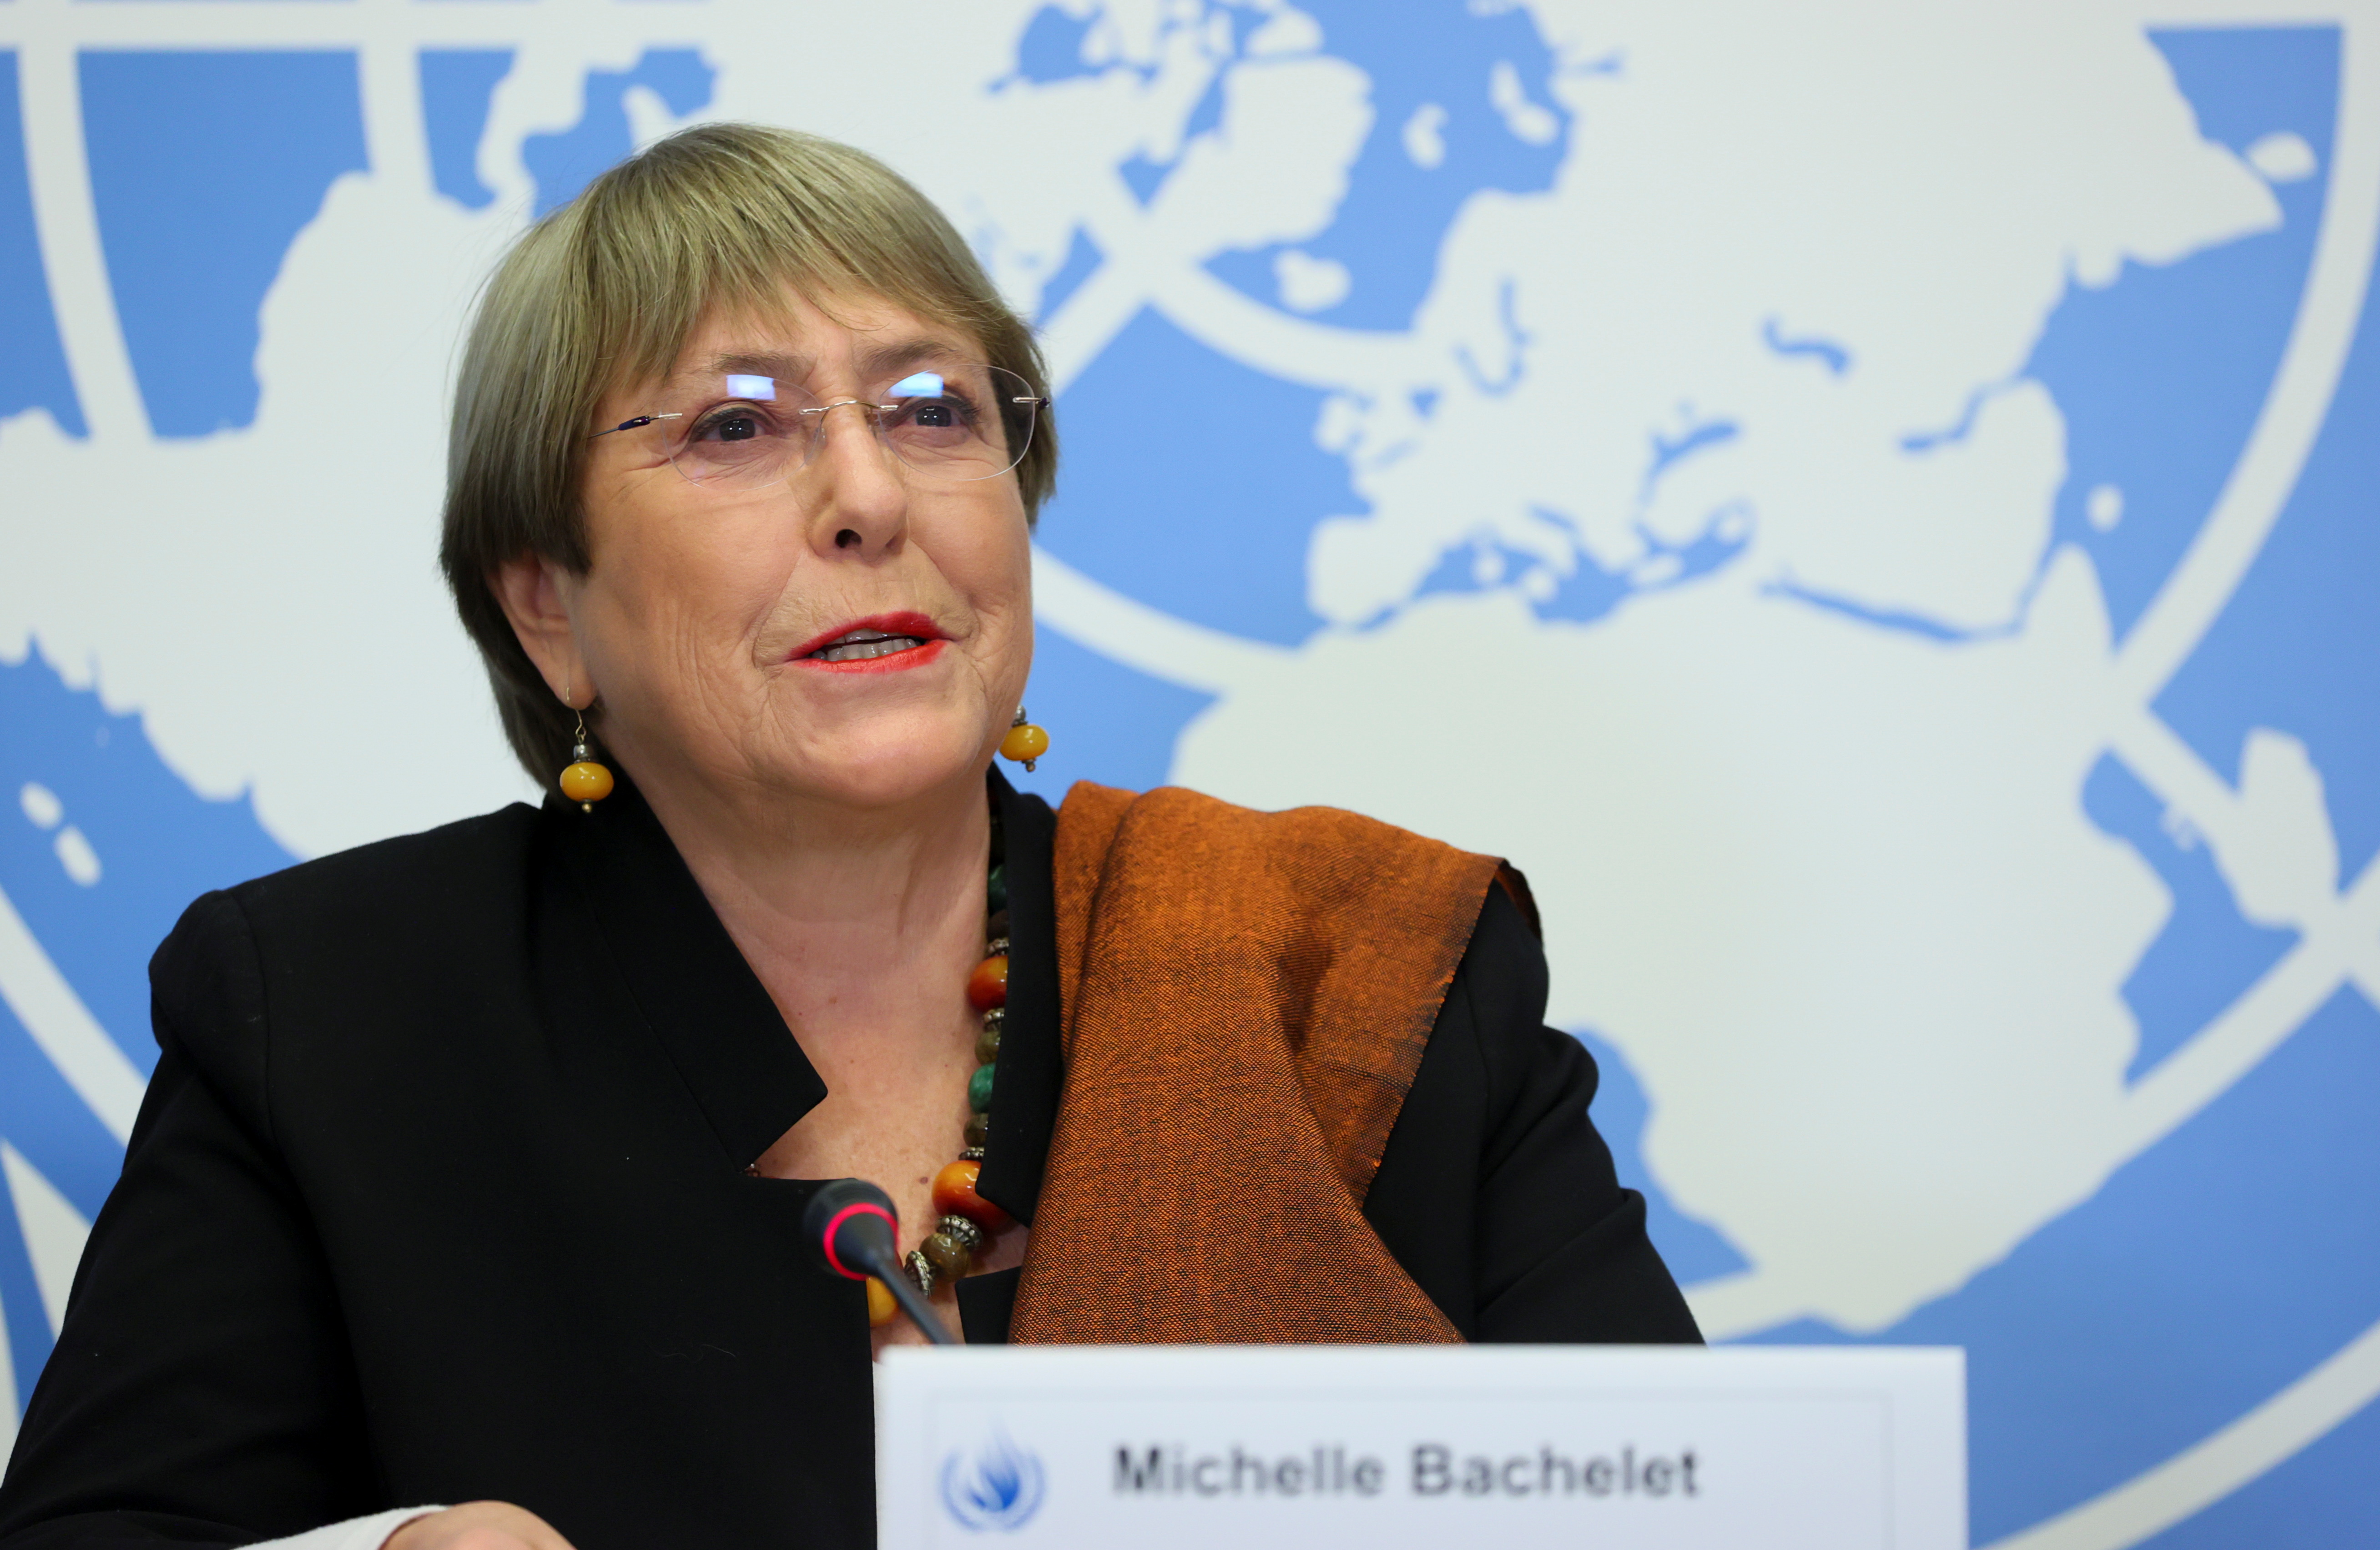 UN High Commissioner Bachelet attends launch of joint investigation on Tigray region, in Geneva